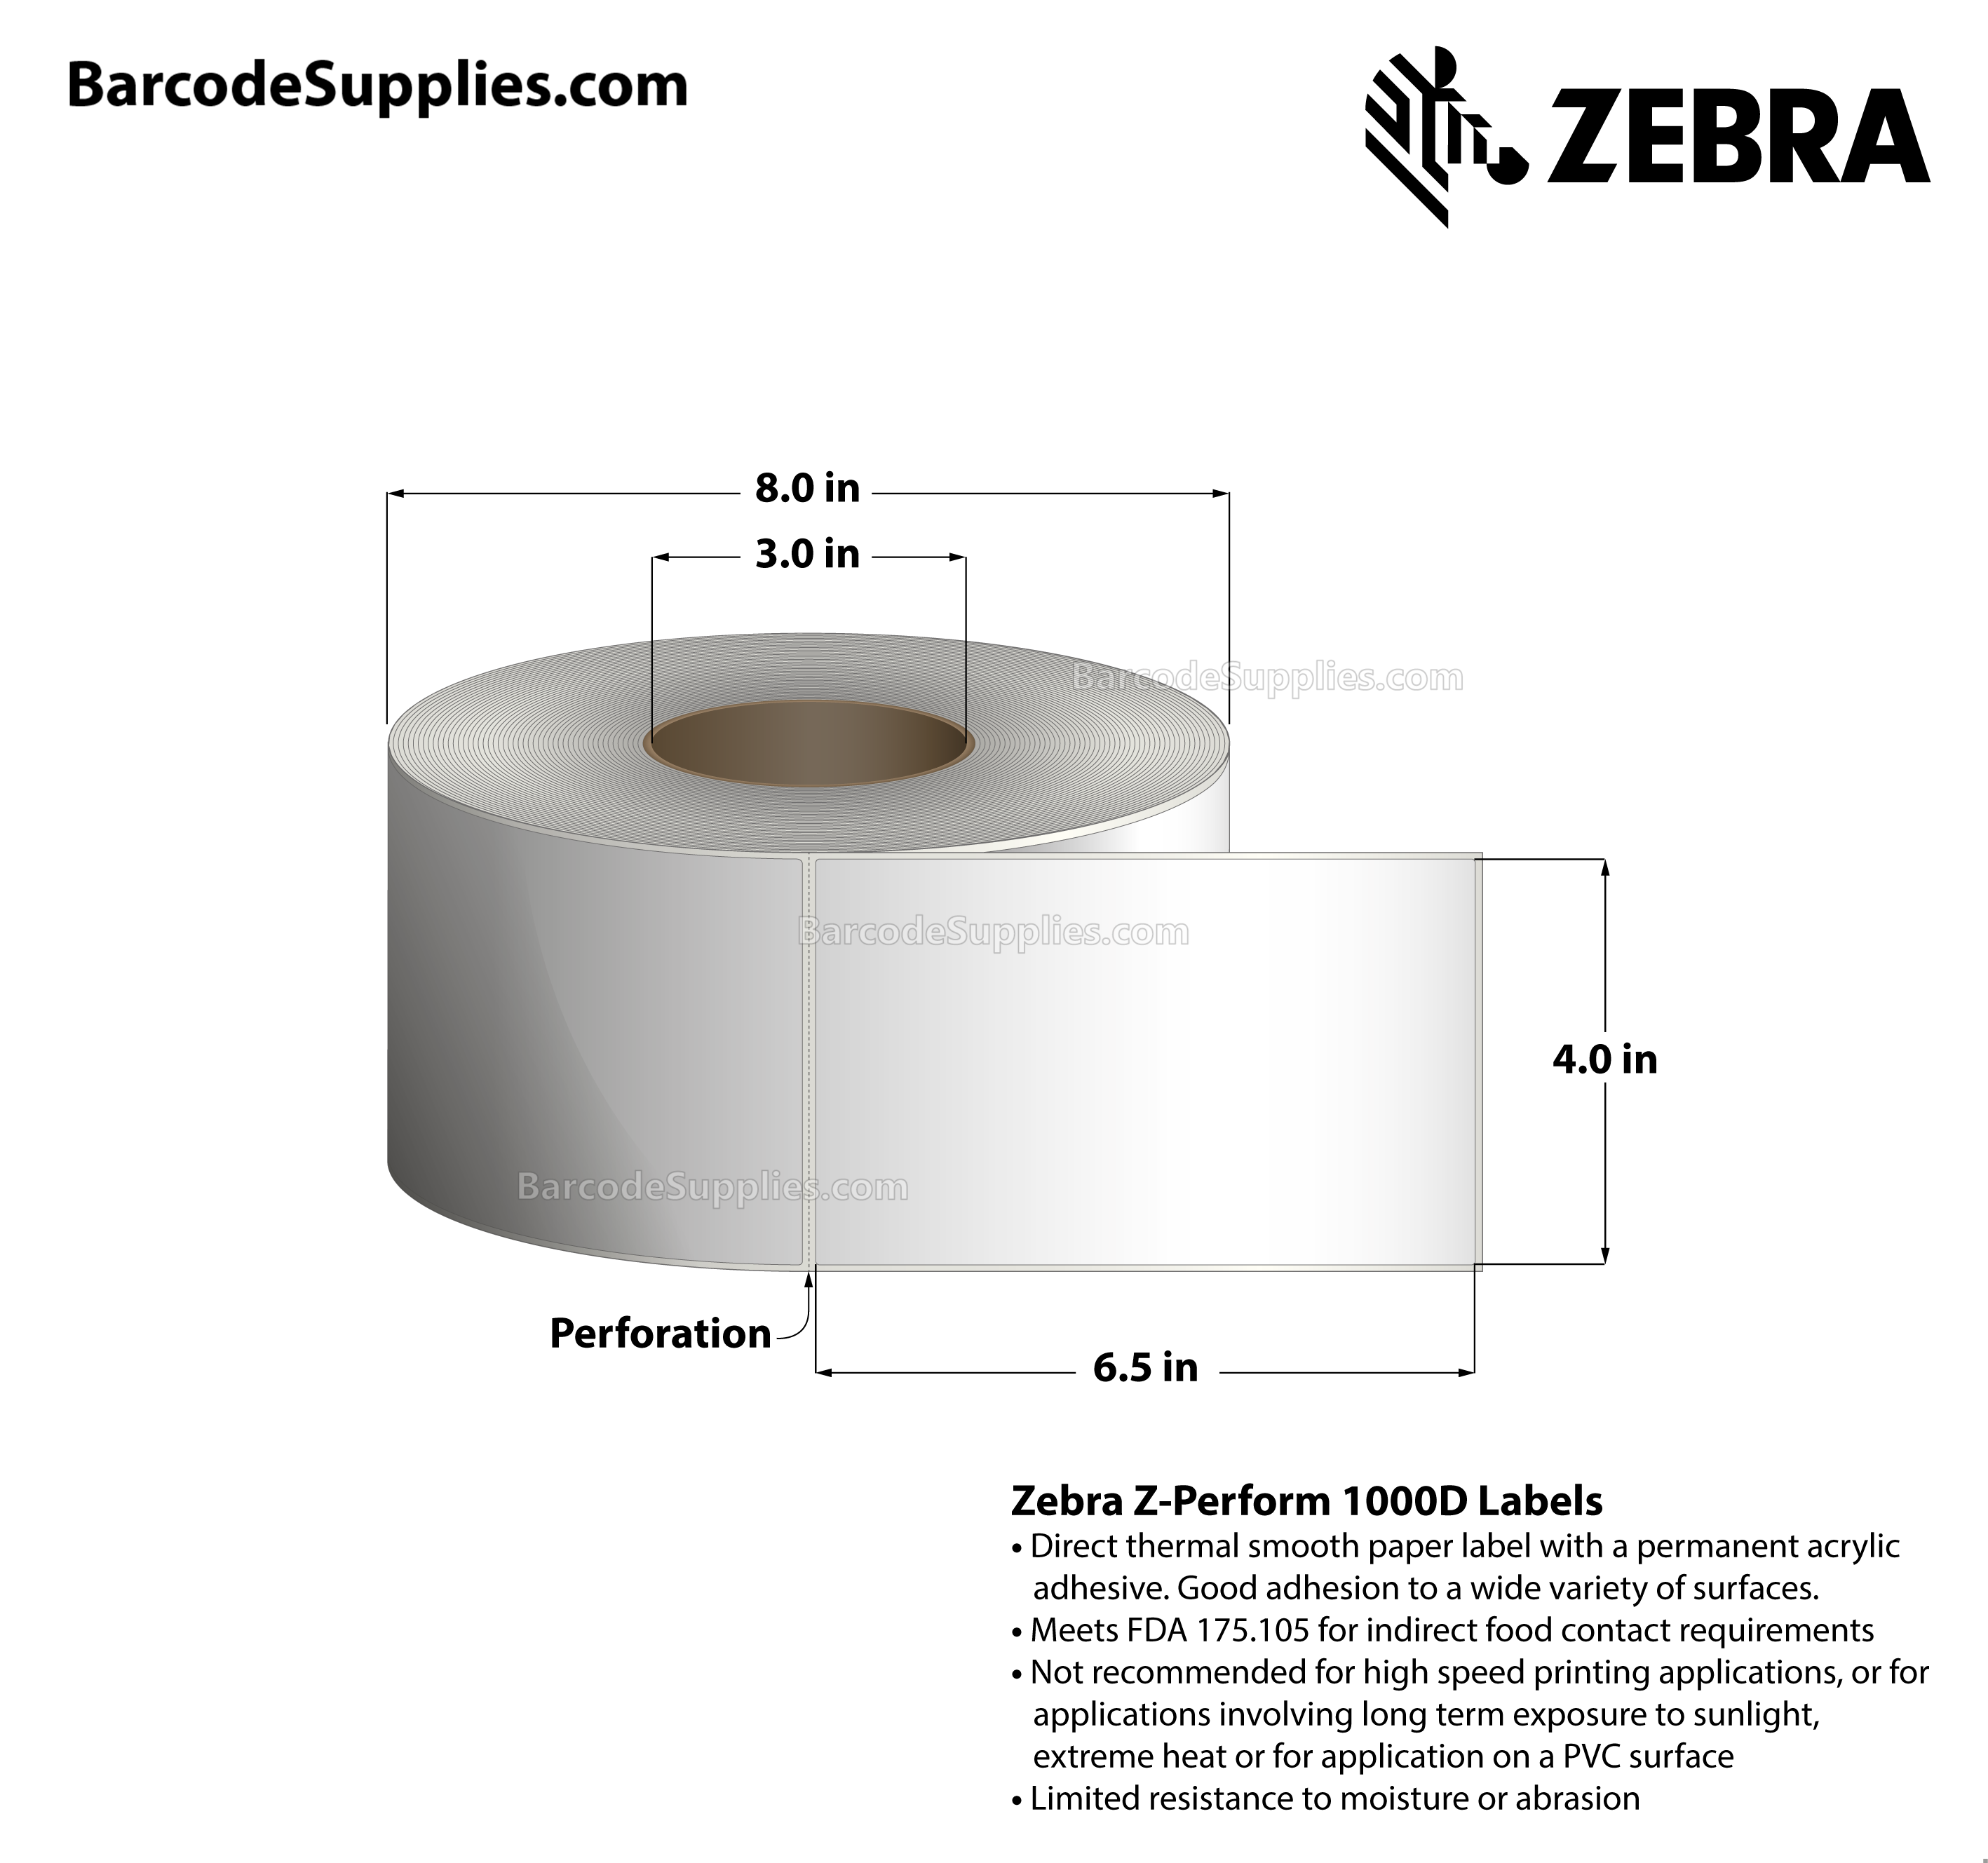 4 x 6.5 Direct Thermal White Z-Perform 1000D Labels With Permanent Adhesive - Perforated - 900 Labels Per Roll - Carton Of 4 Rolls - 3600 Labels Total - MPN: 10000300